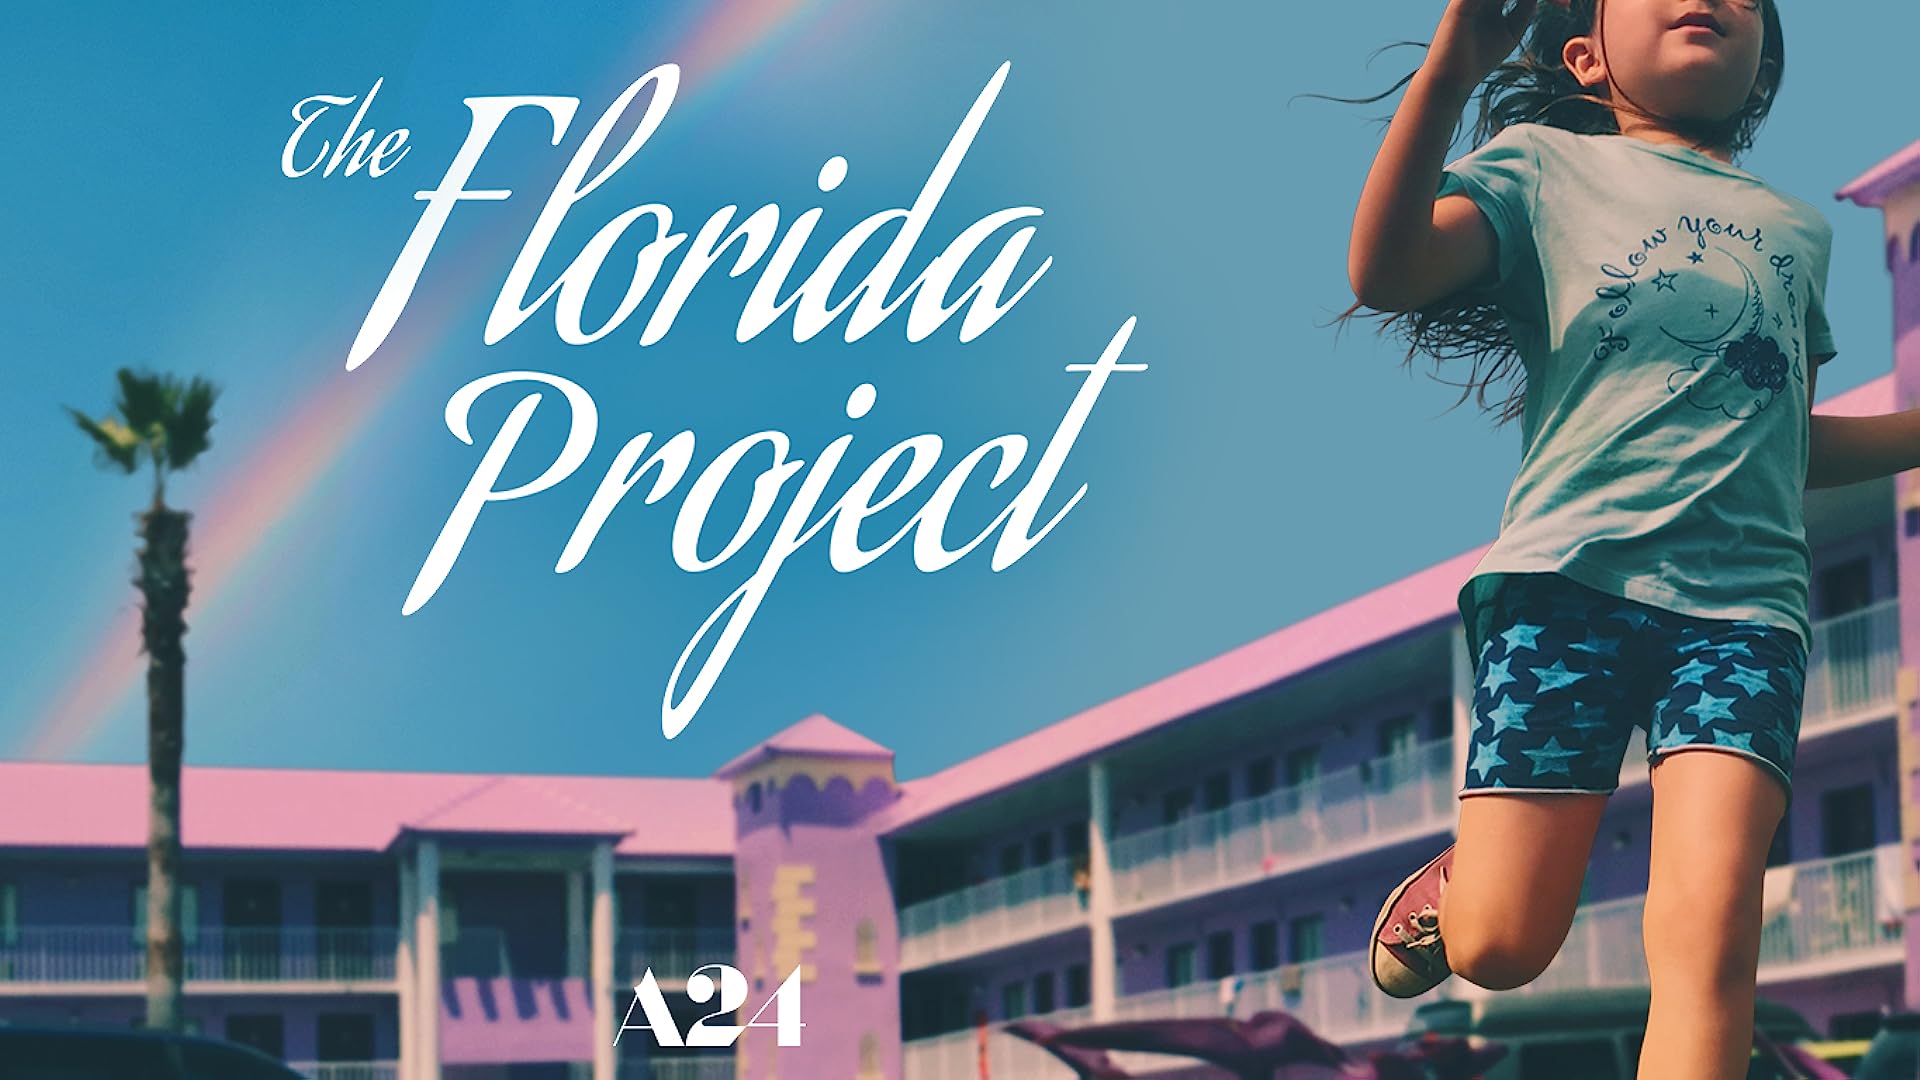 44-facts-about-the-movie-the-florida-project